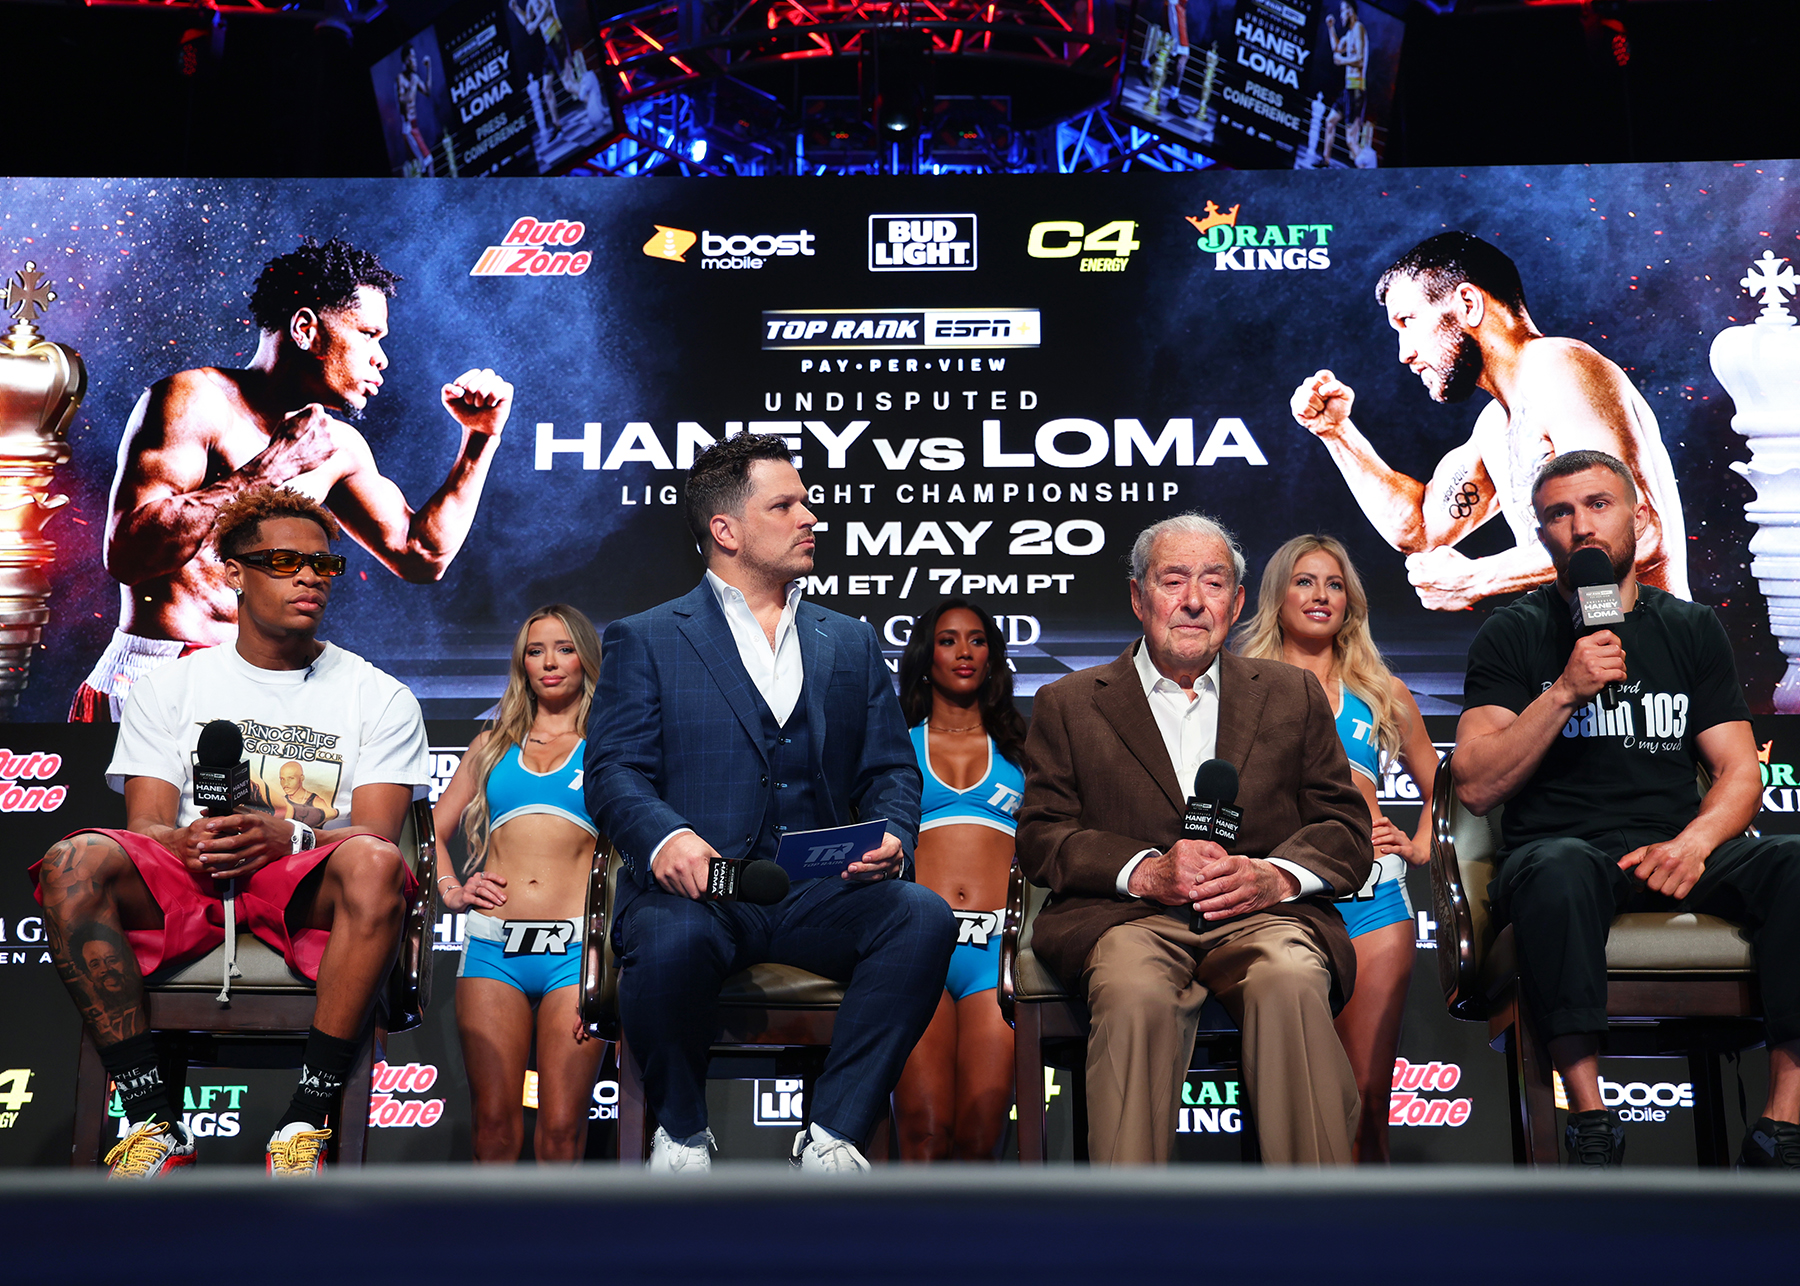 Top Rank boss Arum ‘concerned’ about PEDs in British boxing: ‘That is not good for the sport’